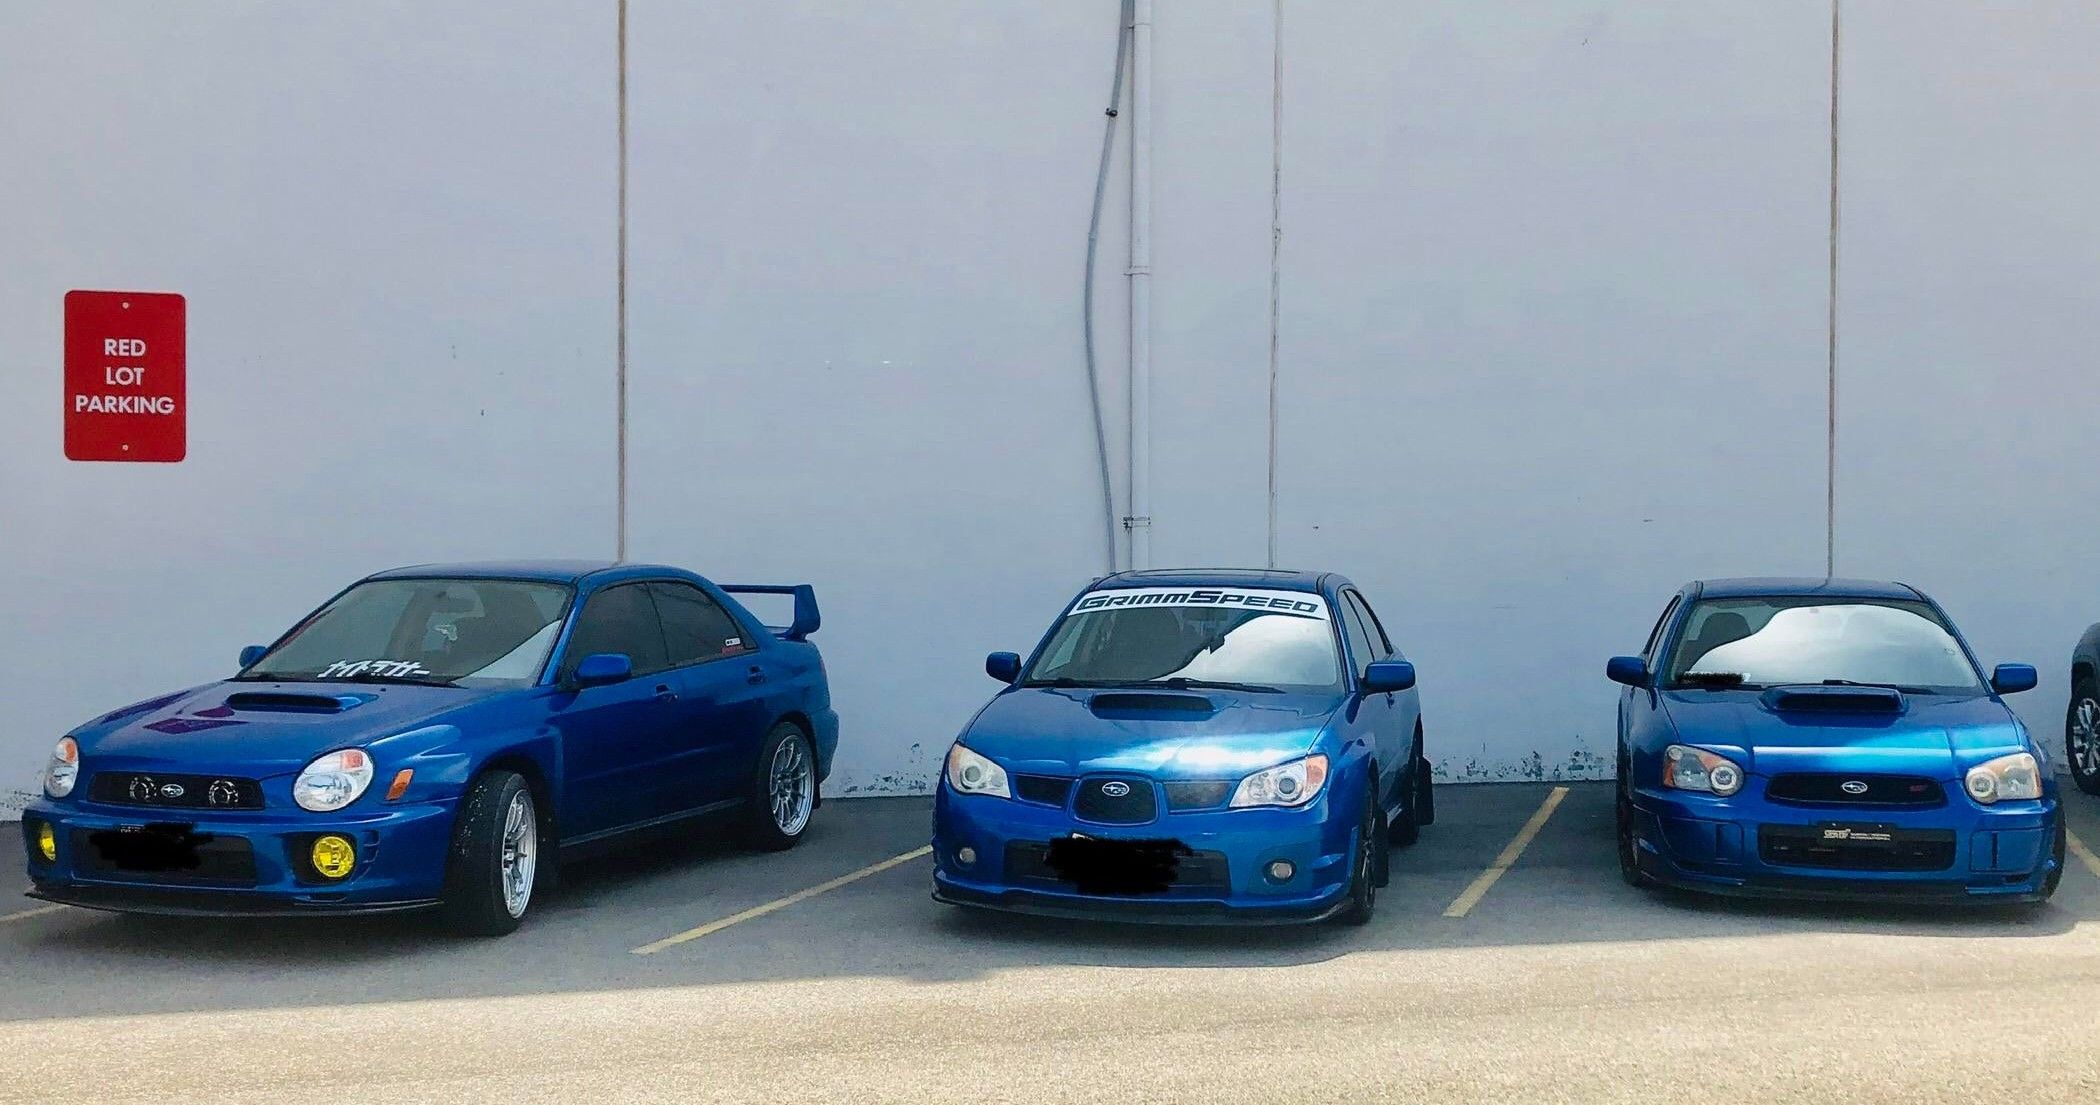 Let's talk about three of the most recognizable tuner cars ever